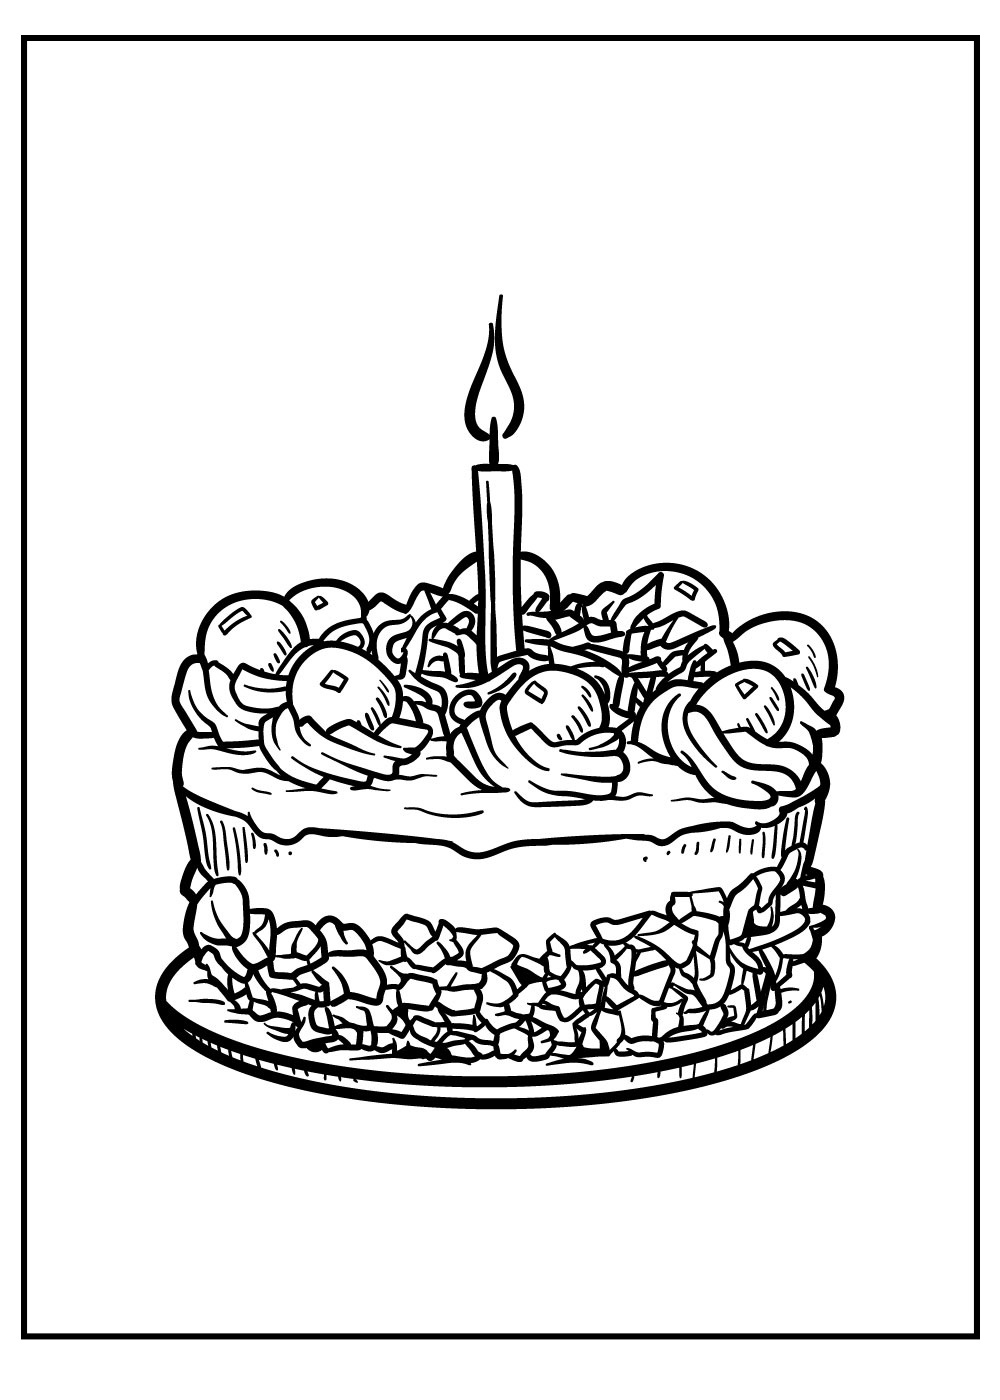 Printable Birthday Cake For Party Coloring Page